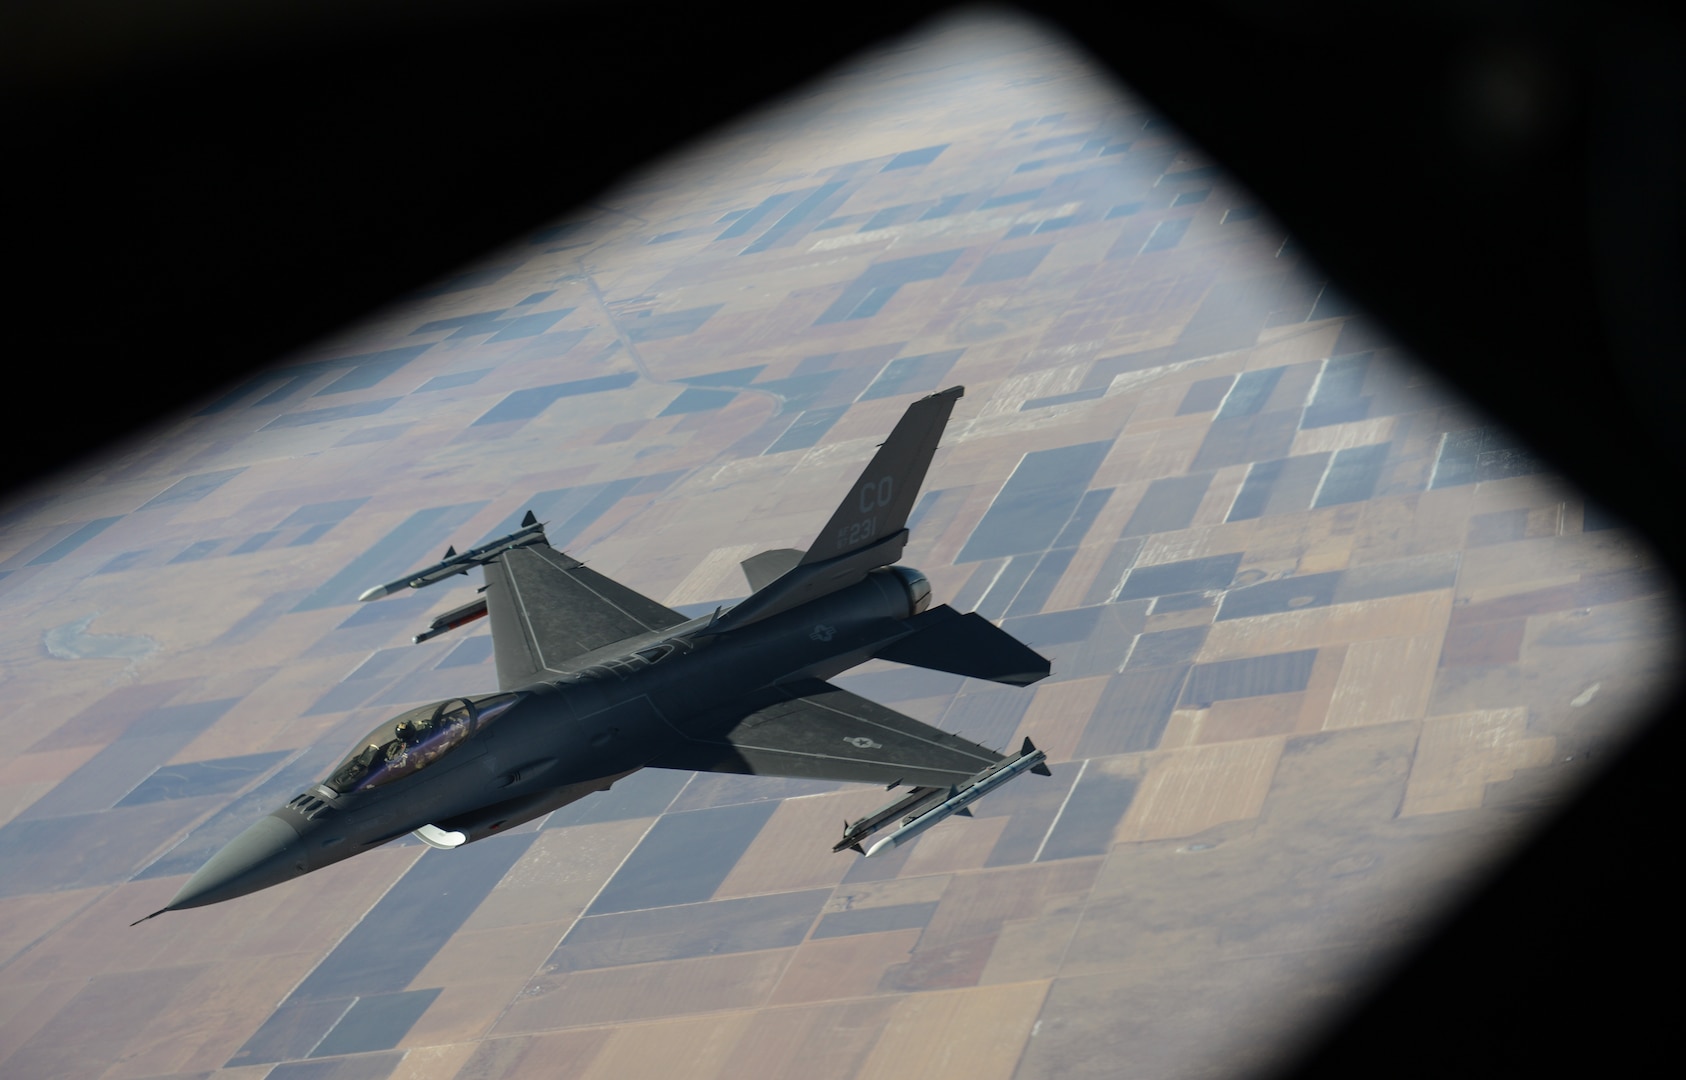 The U.S. Air Force F-16 Falcon from Colorado Air National Guard’s 140th Wing based in Aurora, breaks away from a KC-135R Stratotanker assigned to the Nebraska Air National Guard’s 155th Air Refueling Wing based in Lincoln, after being refueled on November 2, 2019. The F-16 Fighting Falcon is a single-engine supersonic multirole fighter. The F-16 Fighting Falcon is a single-engine supersonic multirole fighter.U.S Air National Guard photo by Staff Sgt Jason Wilson